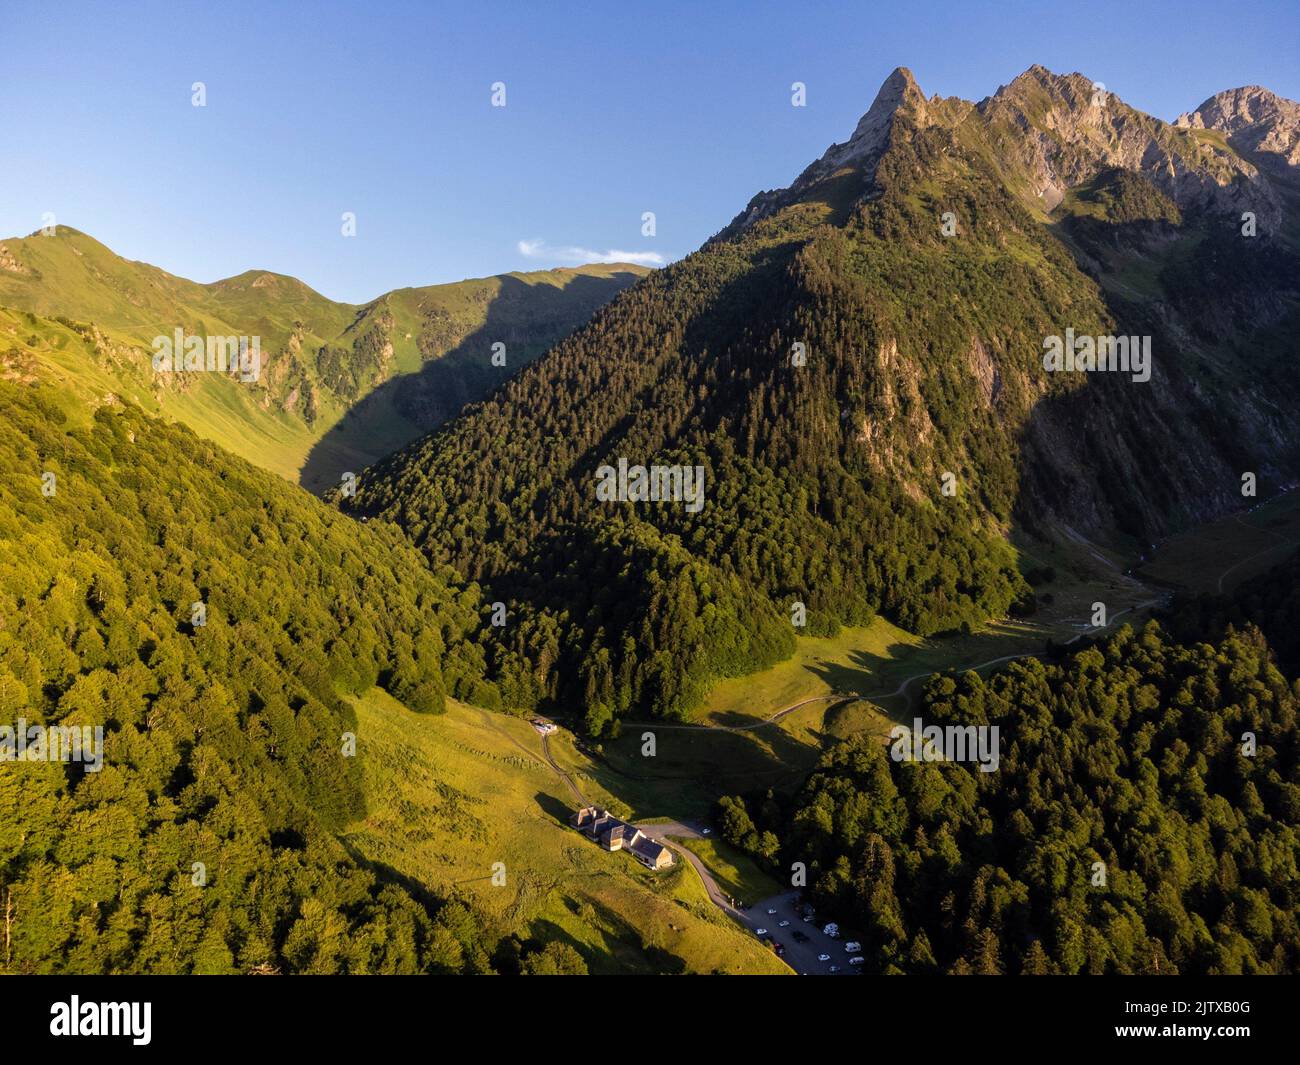 Hospice de France refuge and mountain forest, Freche valley, Luchon, Pyrenean mountain range, France. Stock Photo